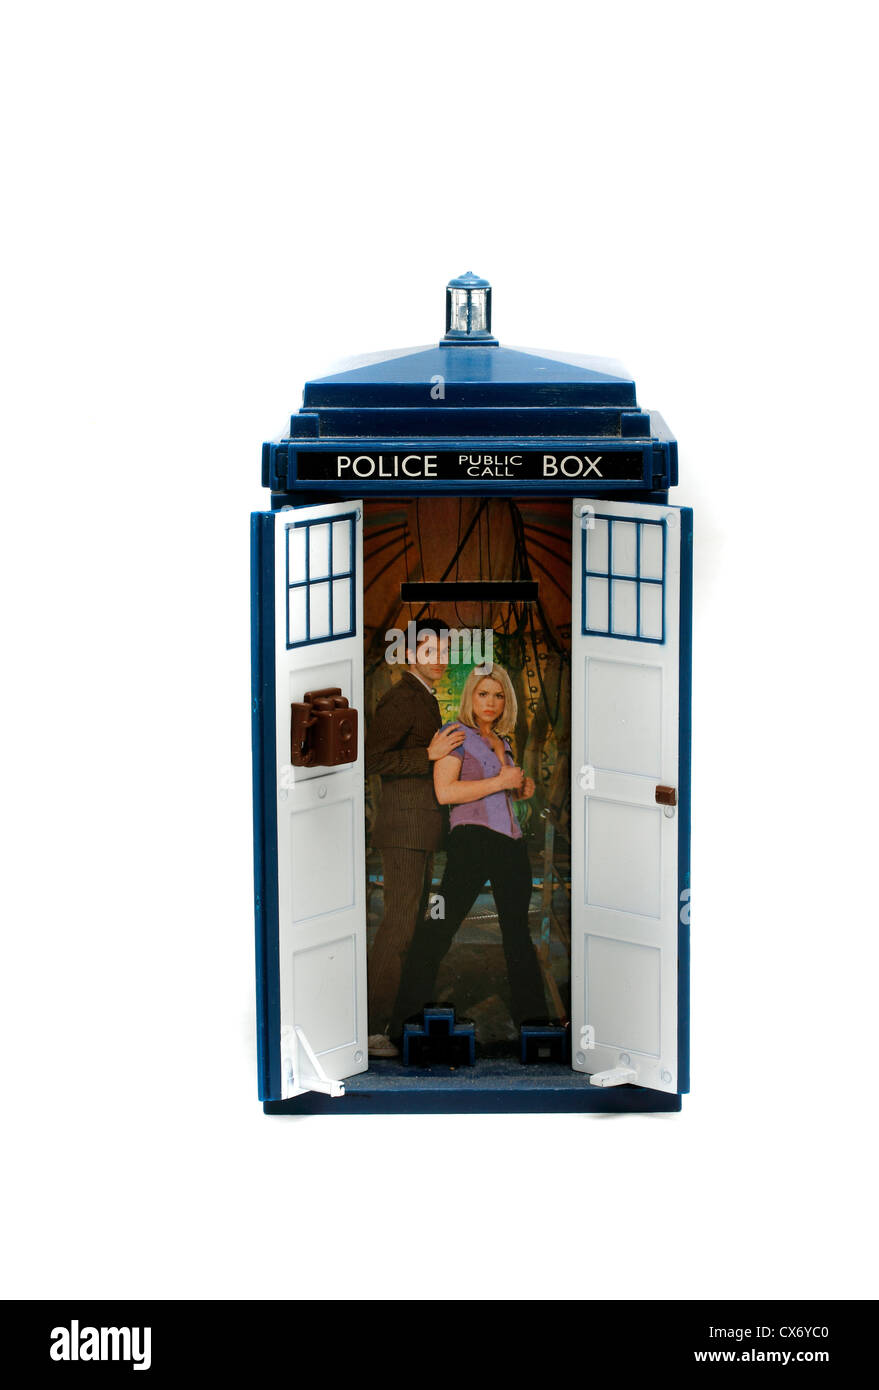 Tardis Money box, for the dedicated young Whovian 17cms tall, 9 cms across the base. battery operated light and tardis engine noise. Doors open up to reveal David Tennant Doctor and Rose. Stock Photo